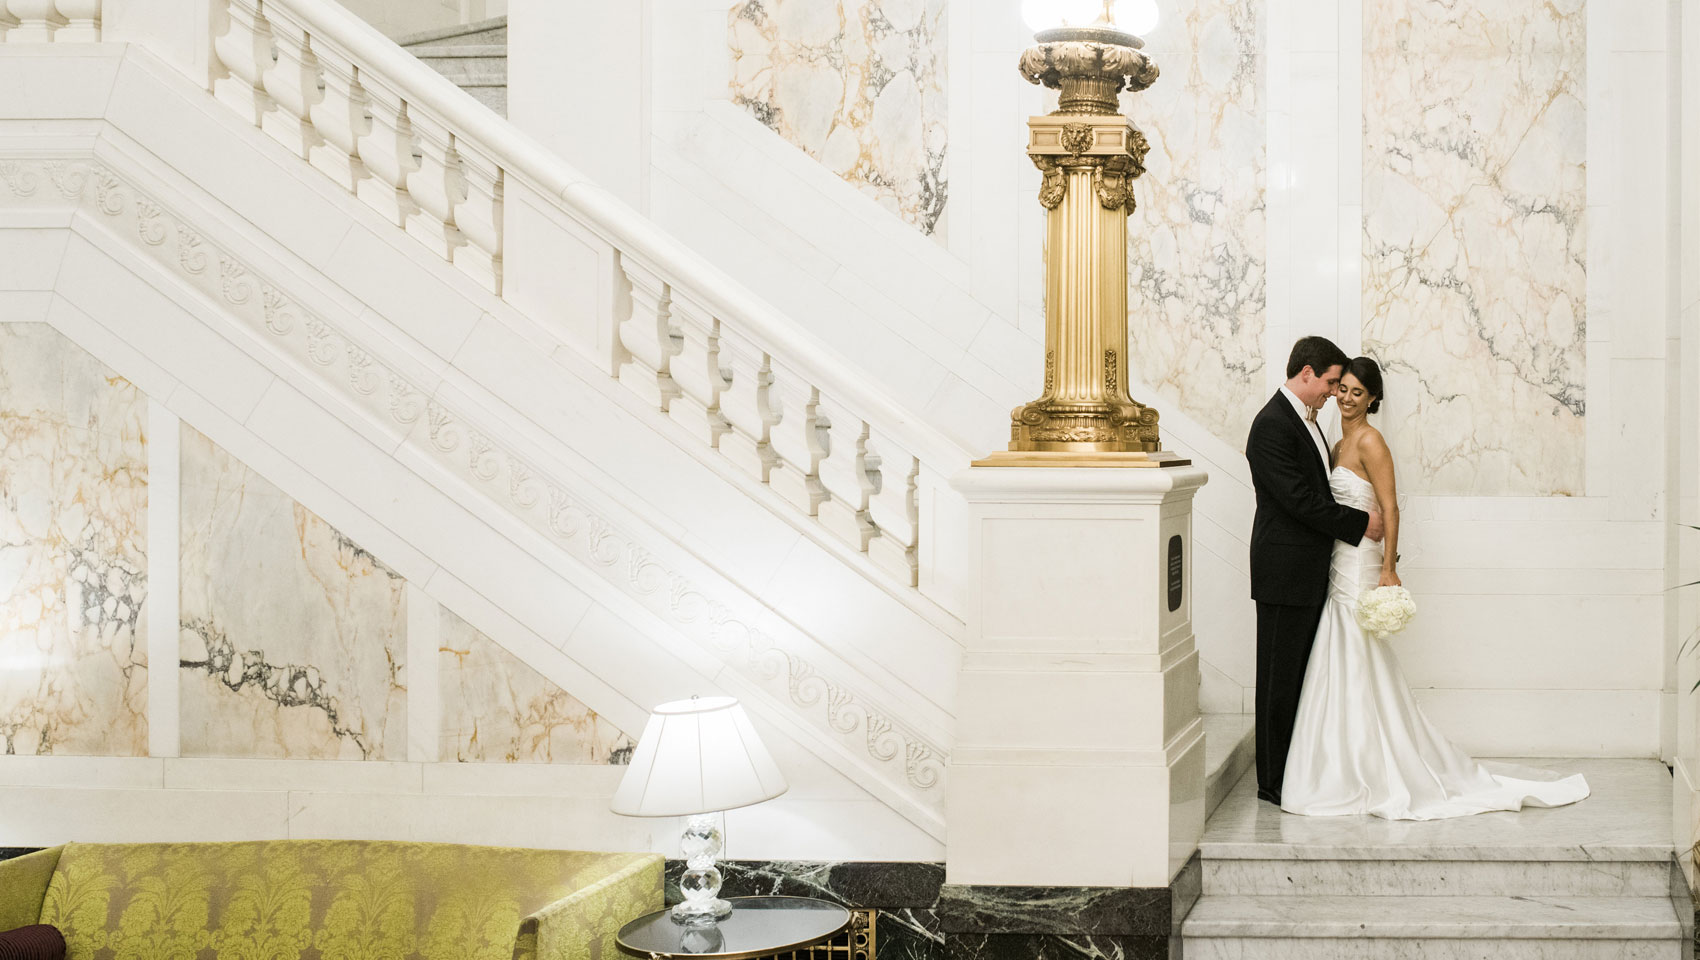 Courtney & Steve pose for a wedding portrait at the foot of the grand marble staircase at Kimpton Hotel Monaco Baltimore.